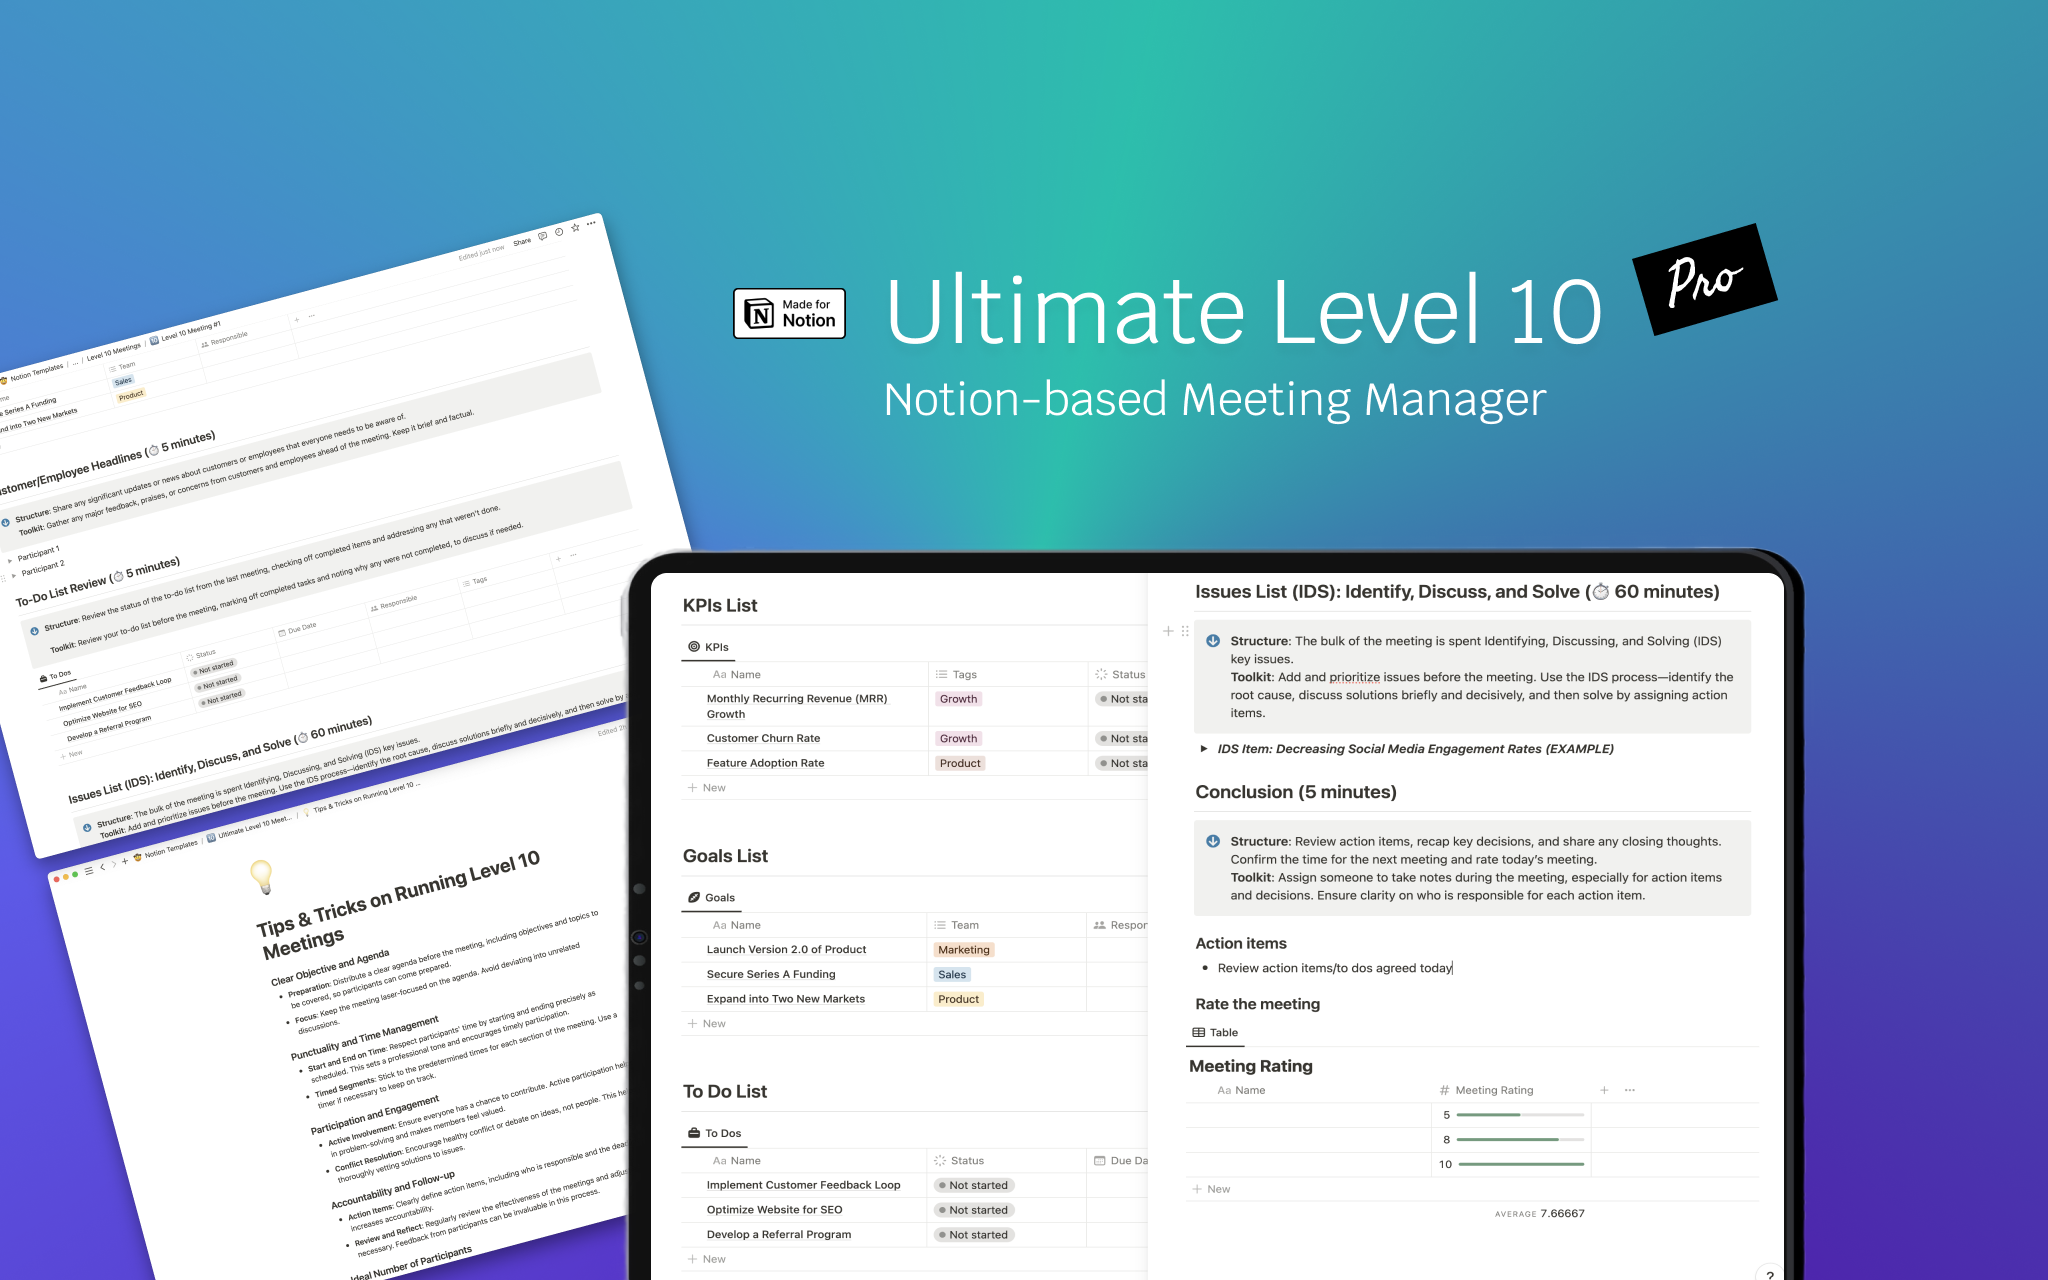 Transform meetings with "Ultimate Level 10 Meeting Manager" - your key to productive, focused EOS meetings. Unlock best practices, manage KPIs & goals, and streamline decision-making. Elevate your team's efficiency and alignment today.
